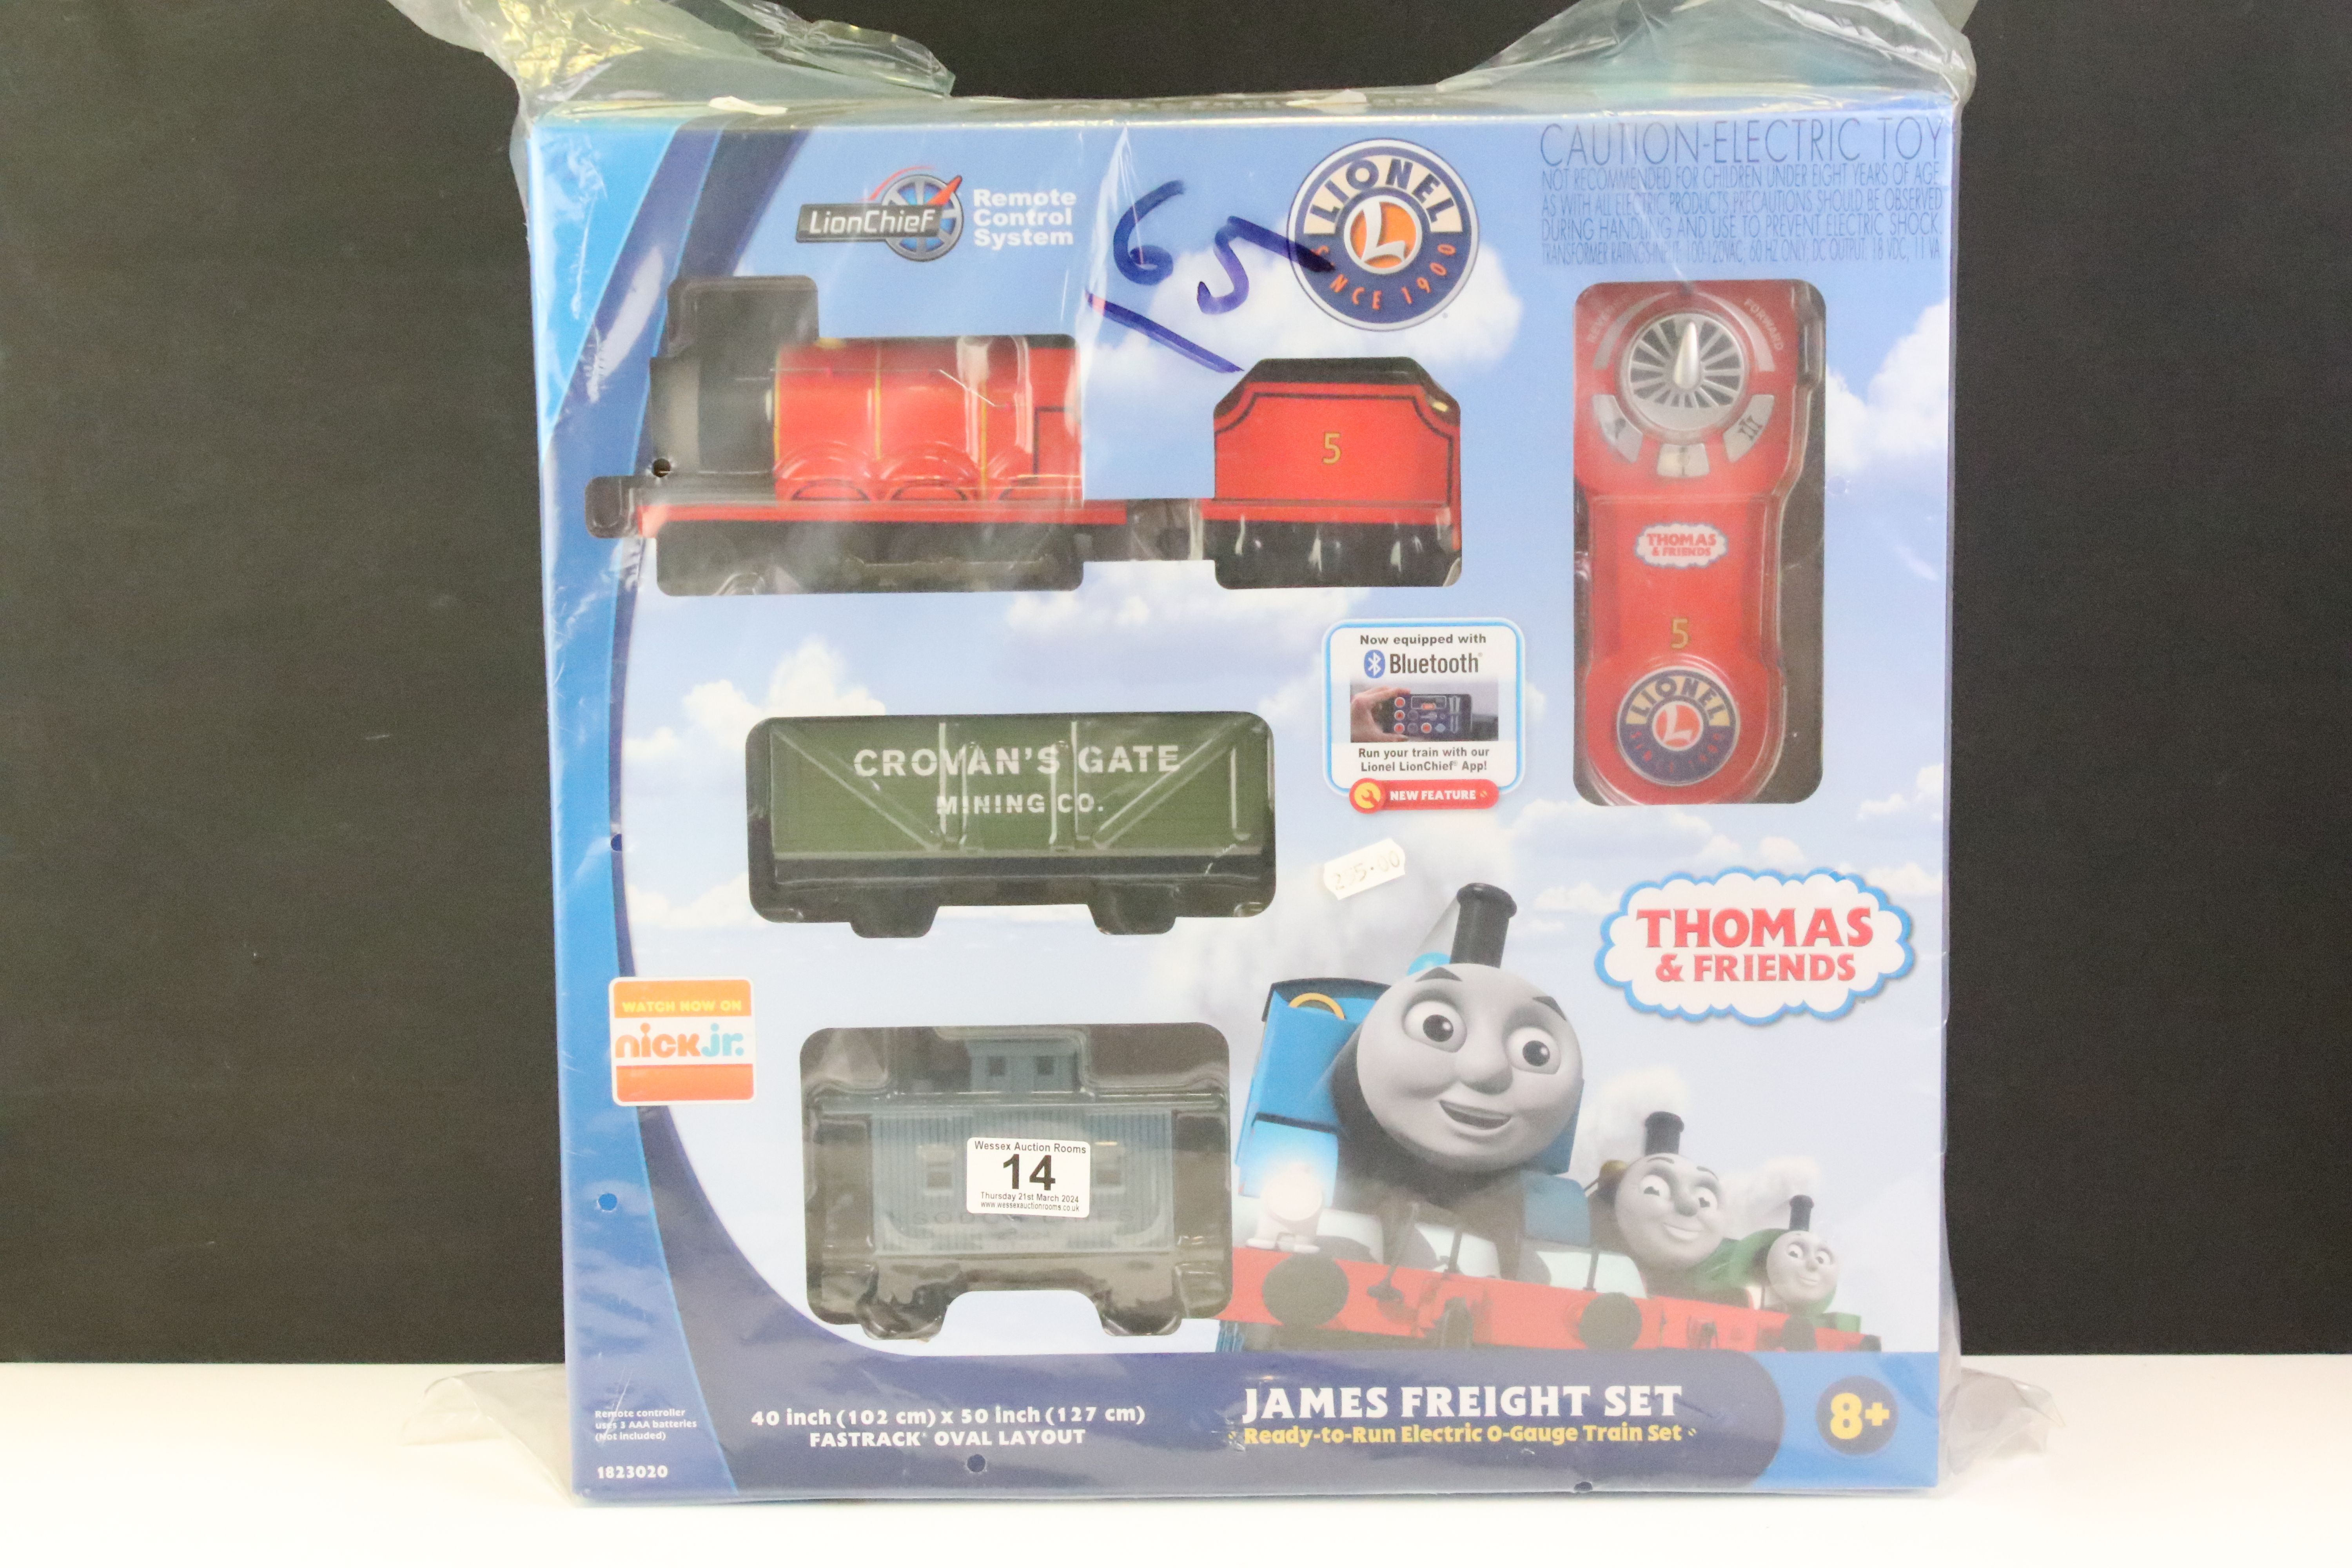 Boxed Lionel O gauge Thomas & Friends 182300 James Freight Train Set, complete and ex